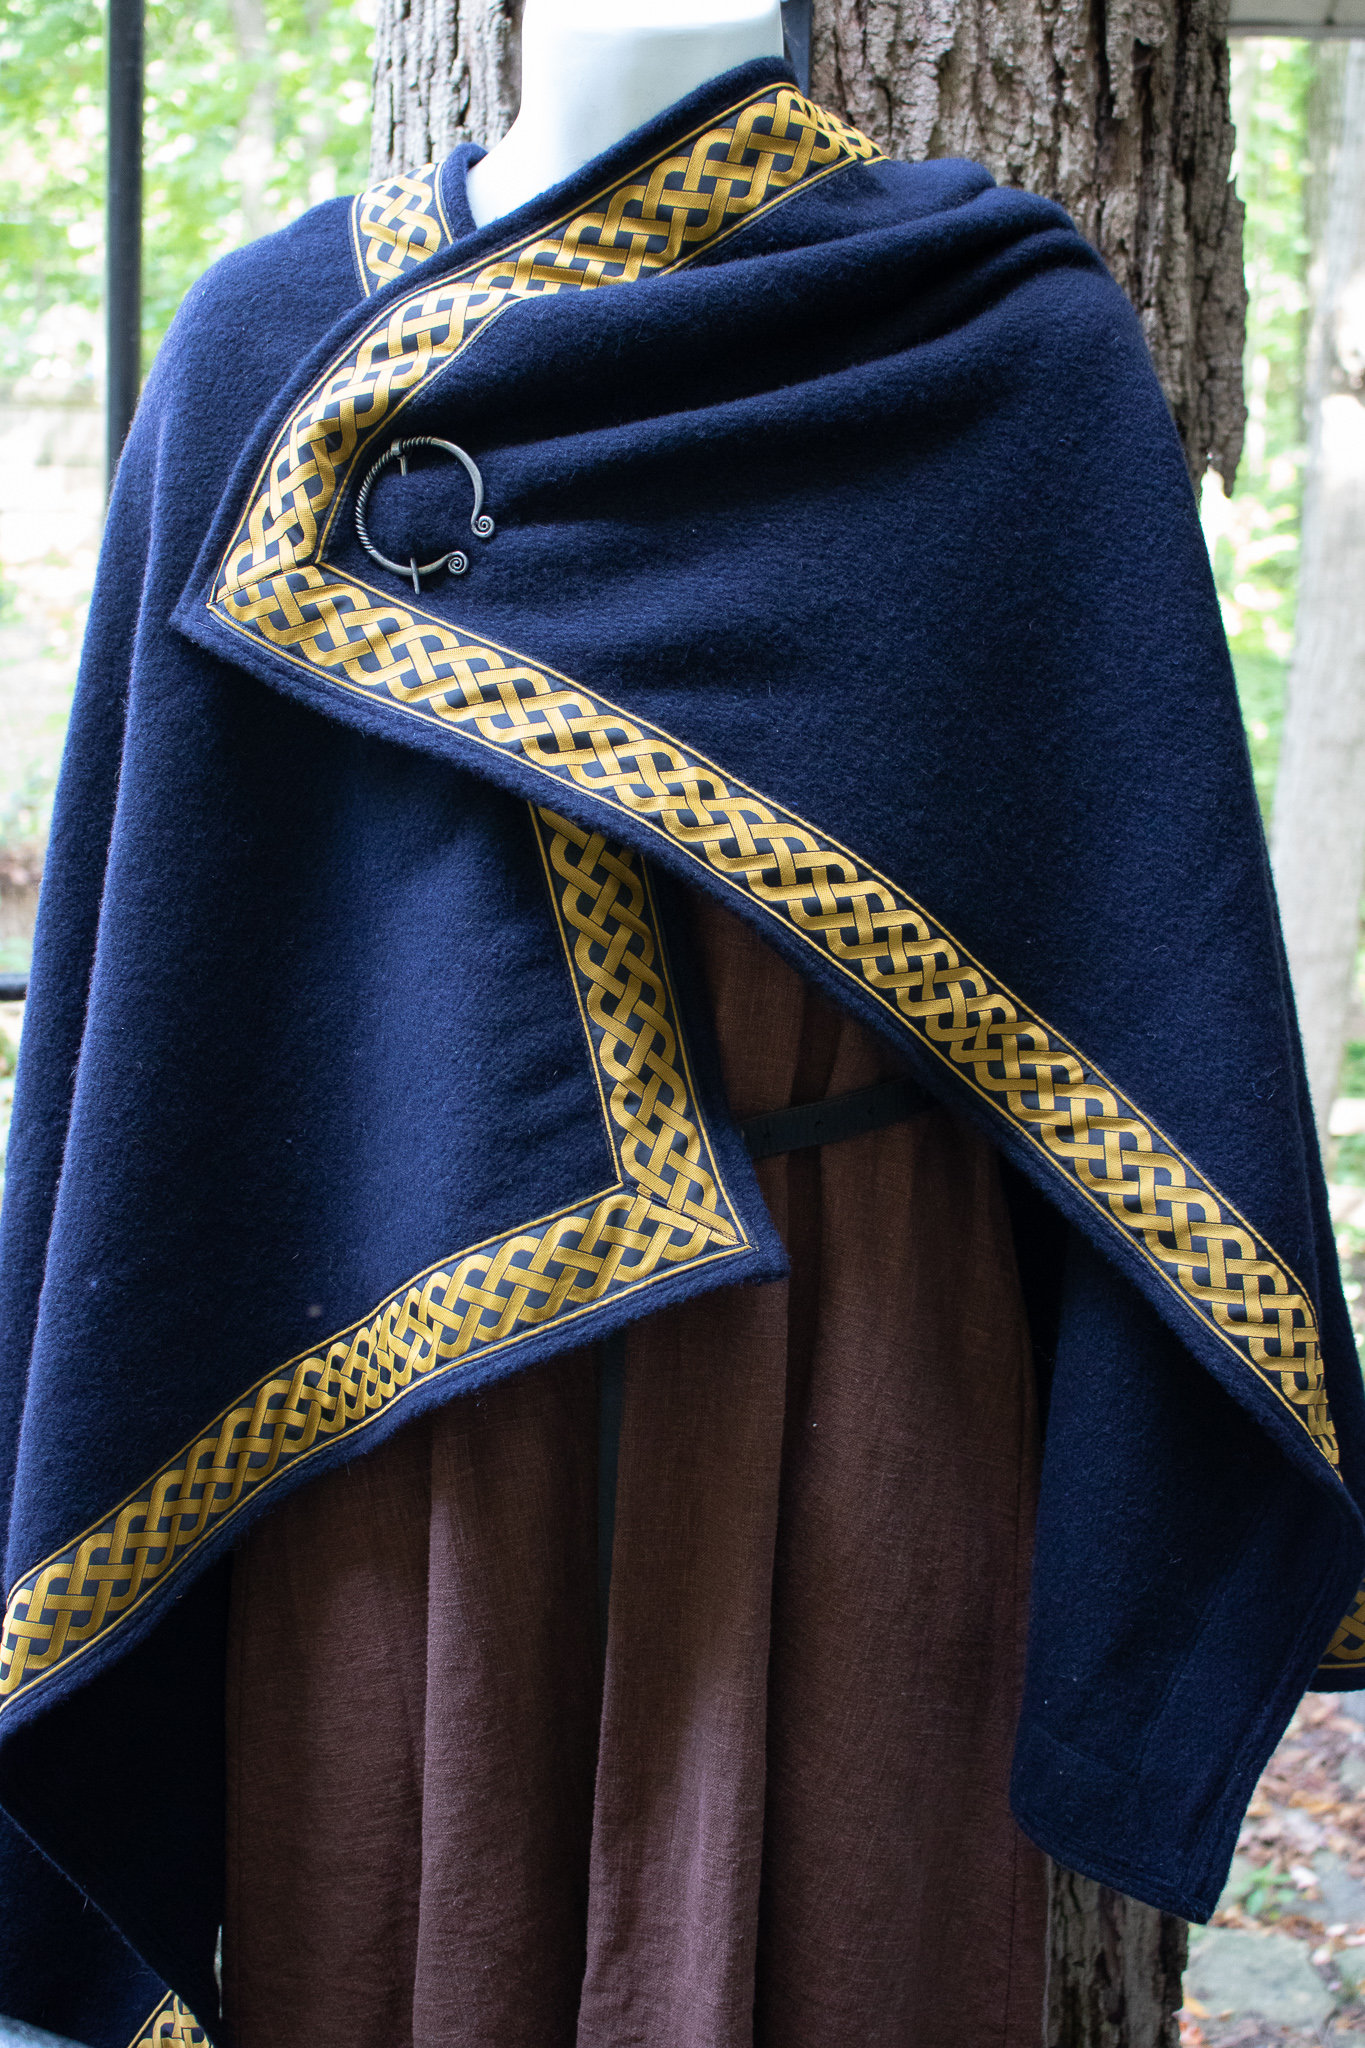 Black and Gold Trim or Braid - Costumes, Medieval Trim – The Sewing Hutch